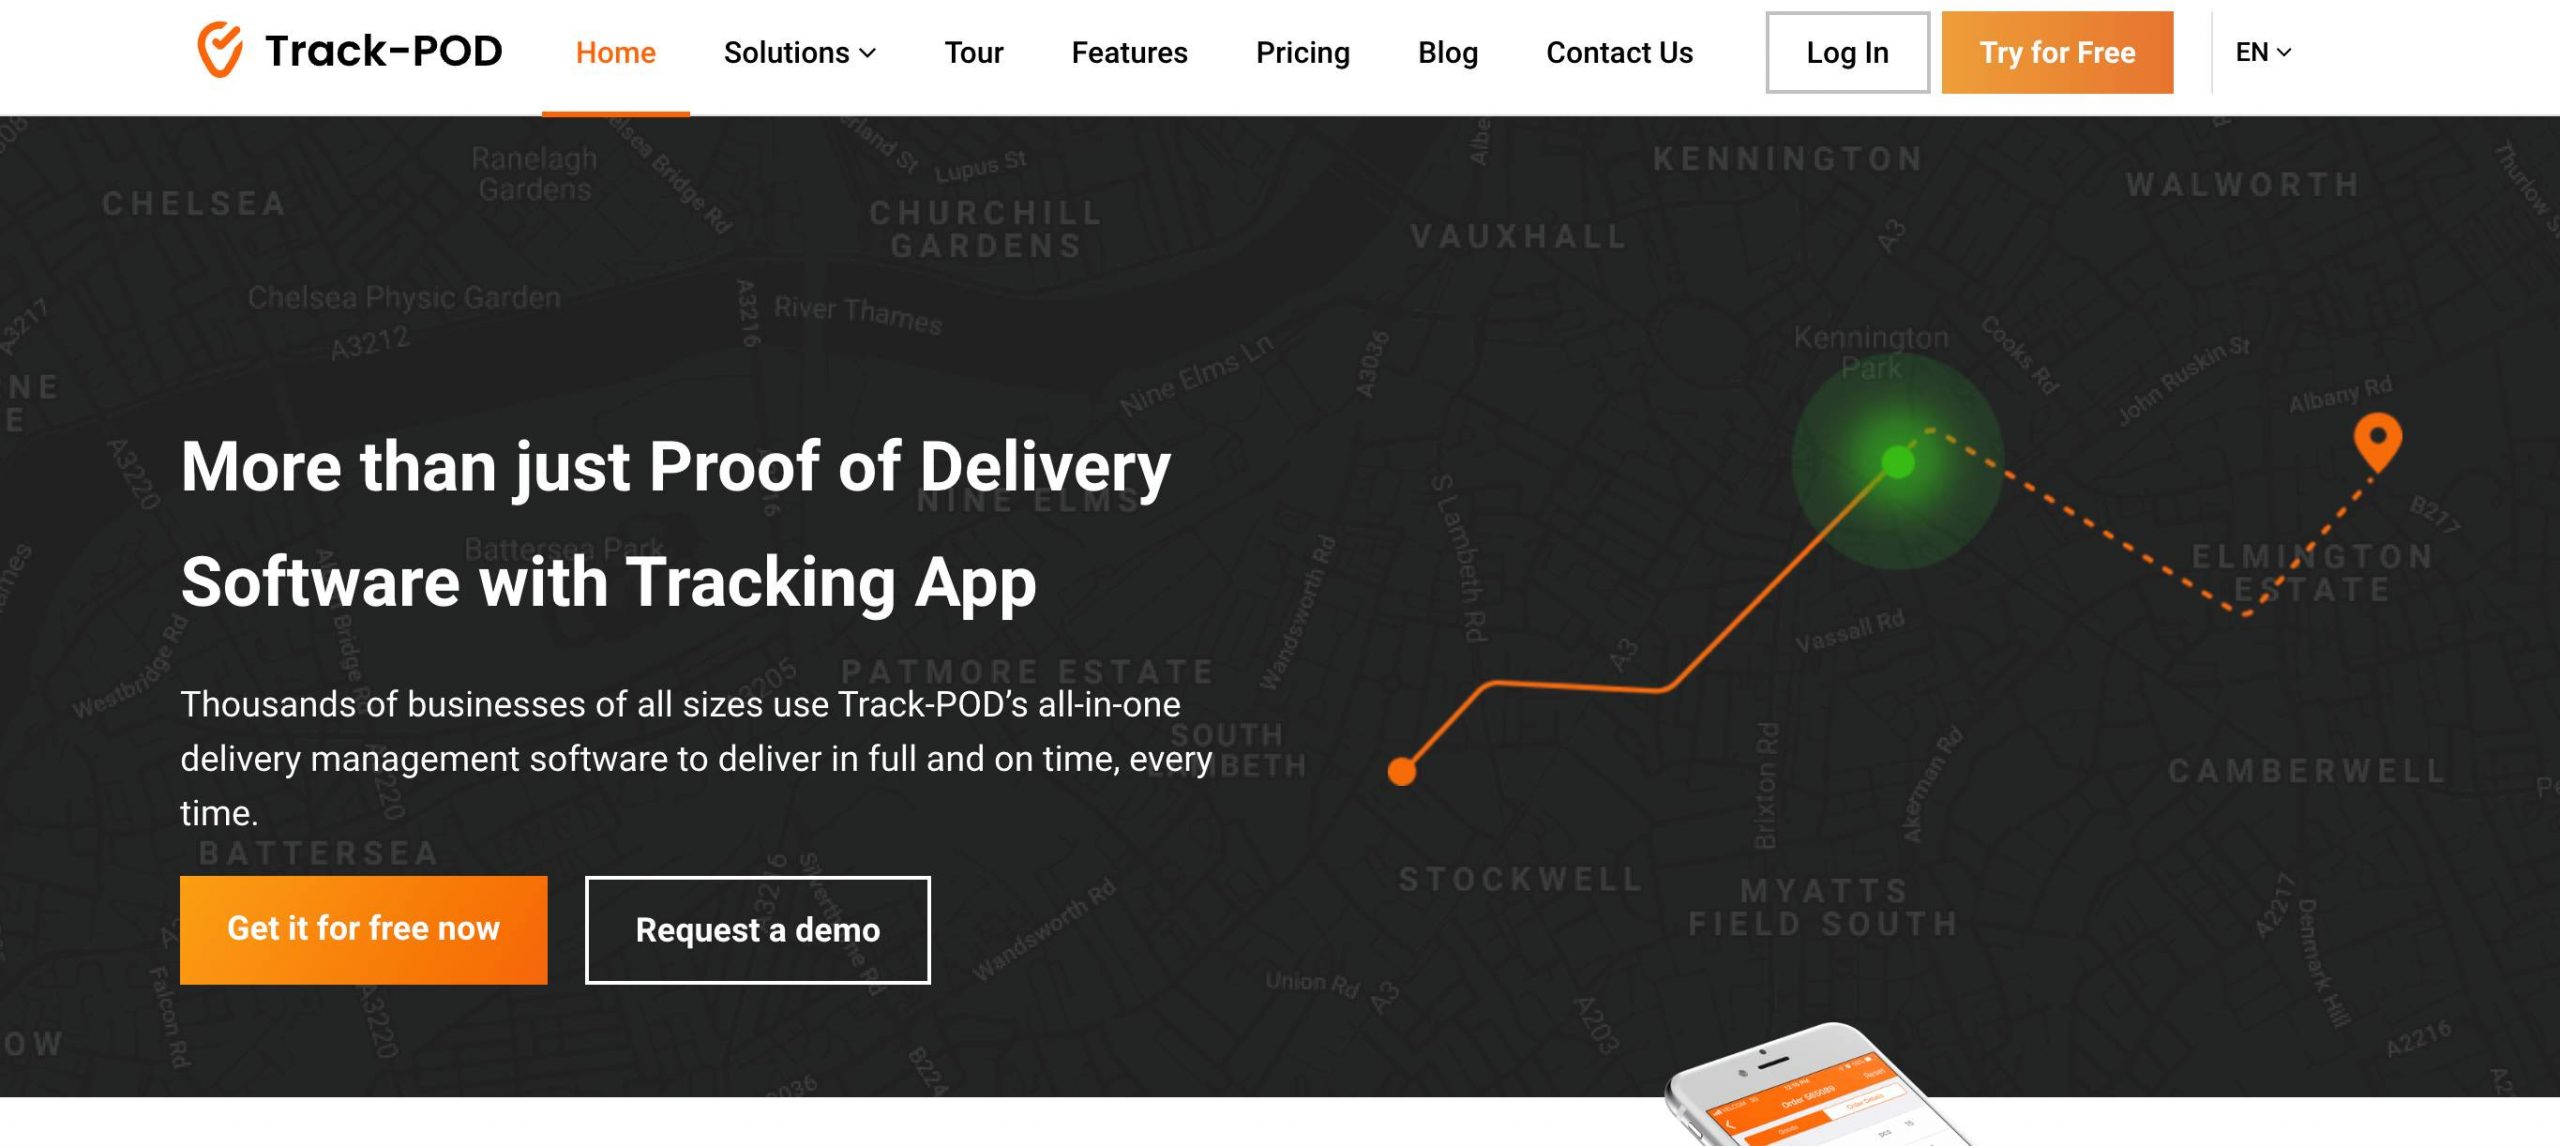 Track-POD Home Page